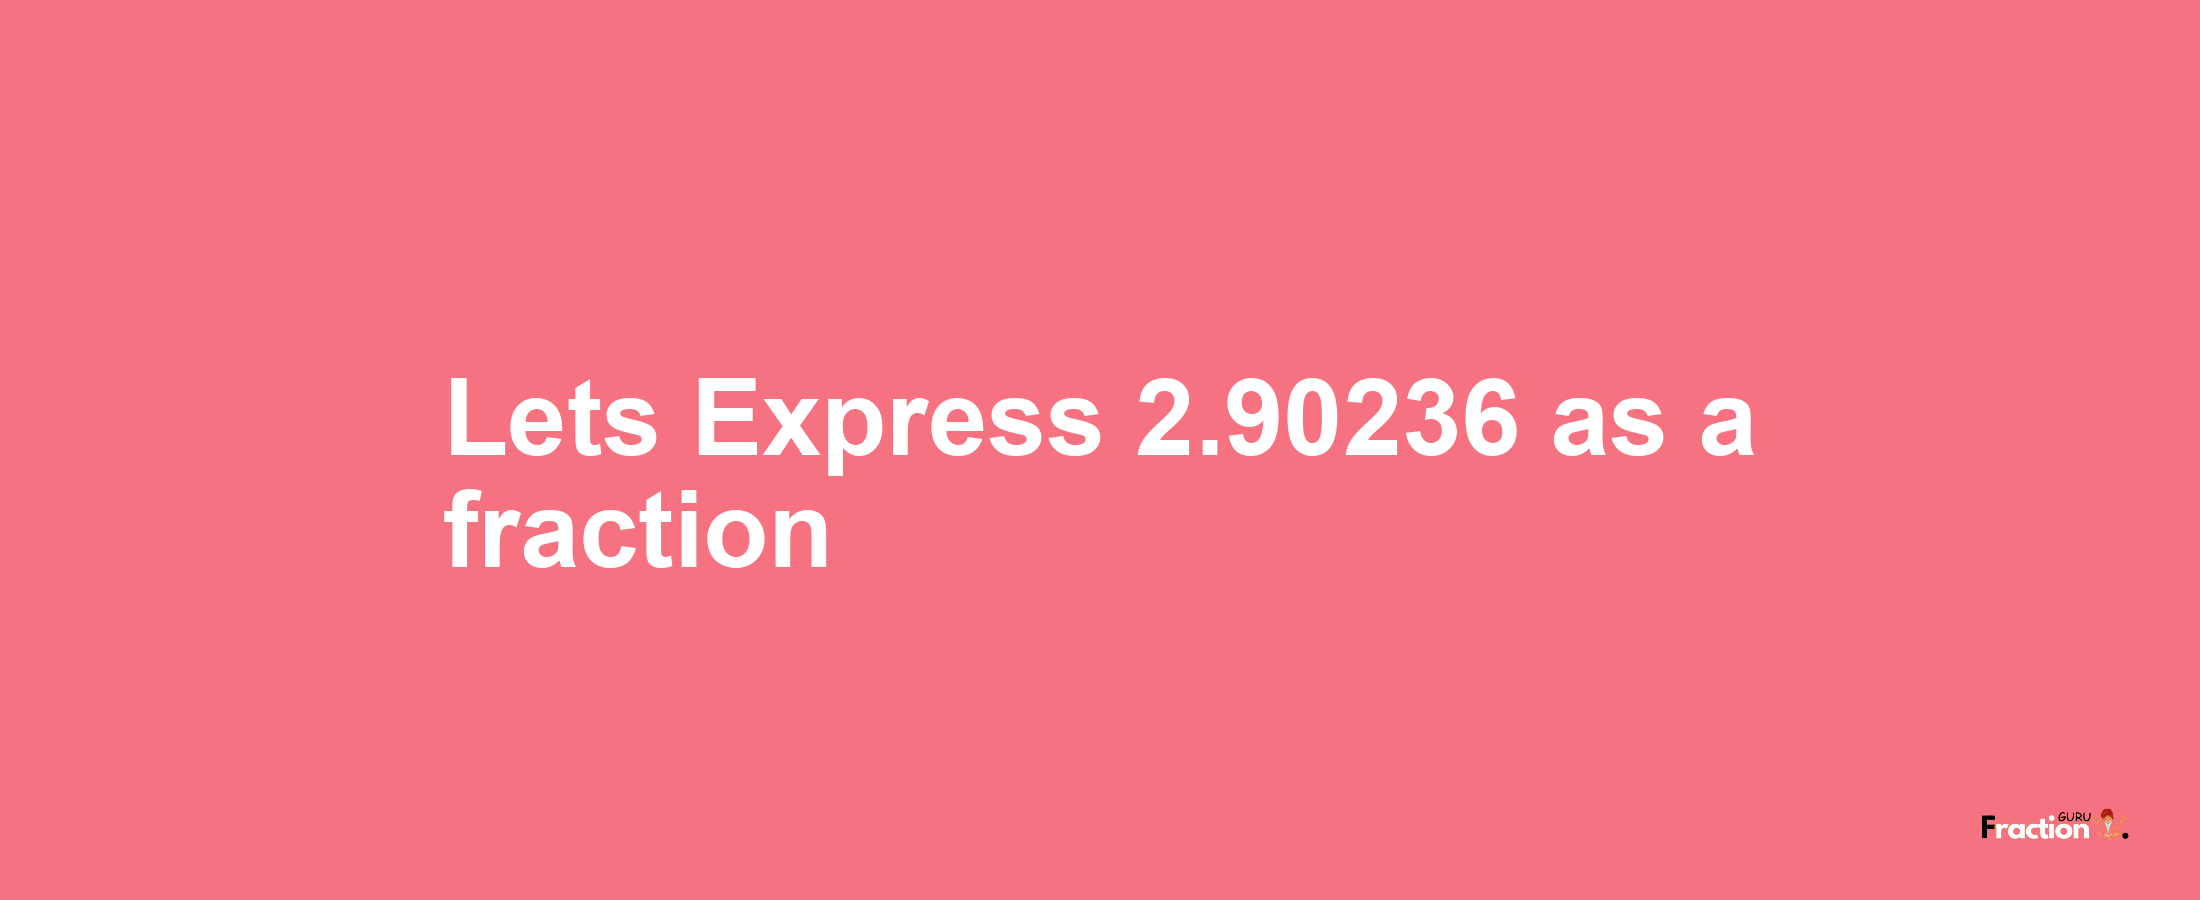 Lets Express 2.90236 as afraction